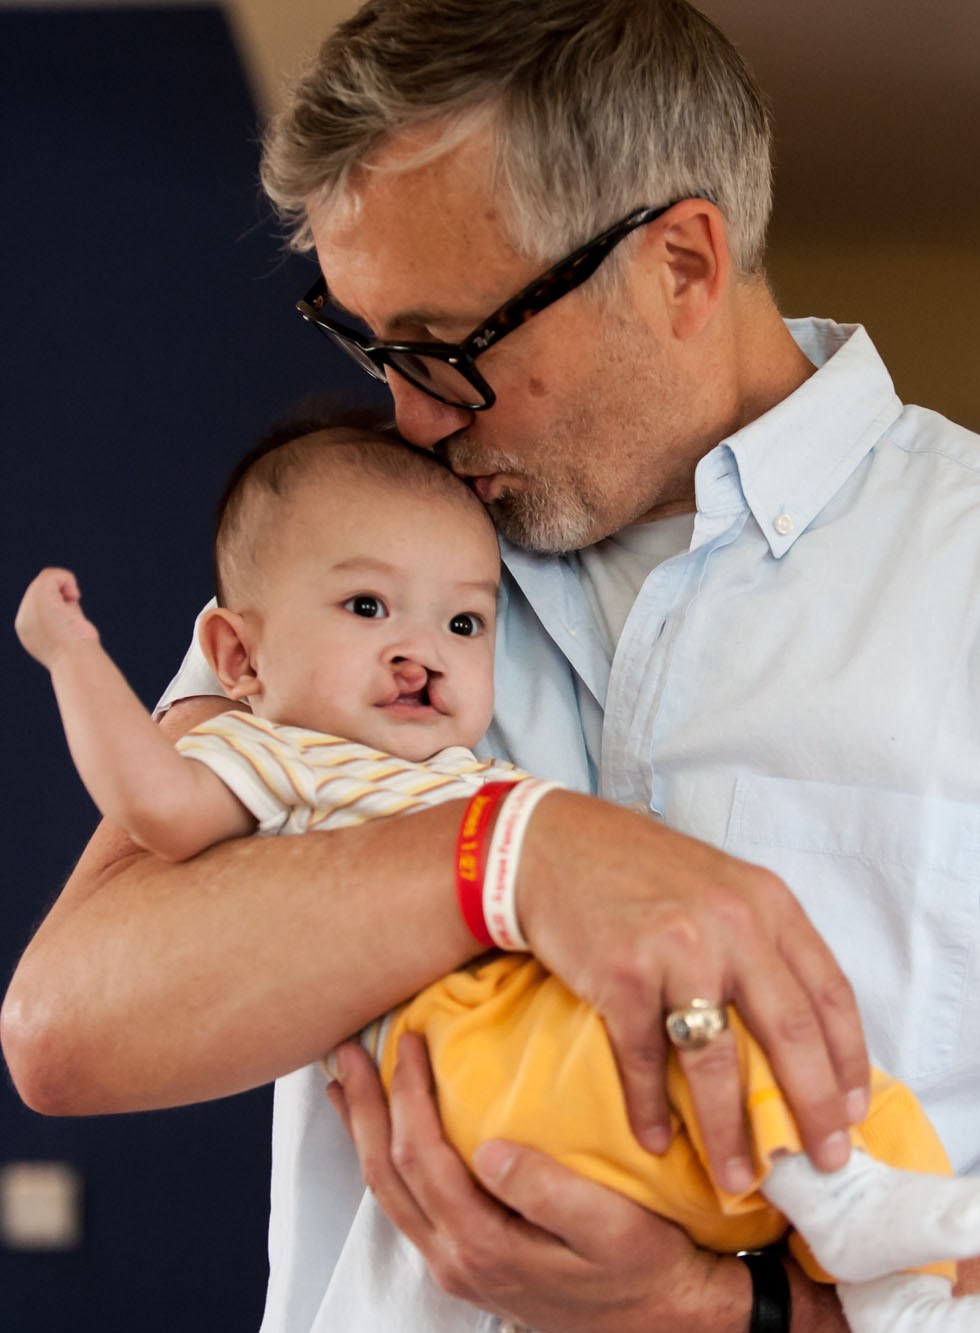 Tim Baker kisses a child born with cleft lip and palate at the Shepherd's Field in Tianjin, north China, May 29, 2012.(Xinhua/Zhang Chaoqun)